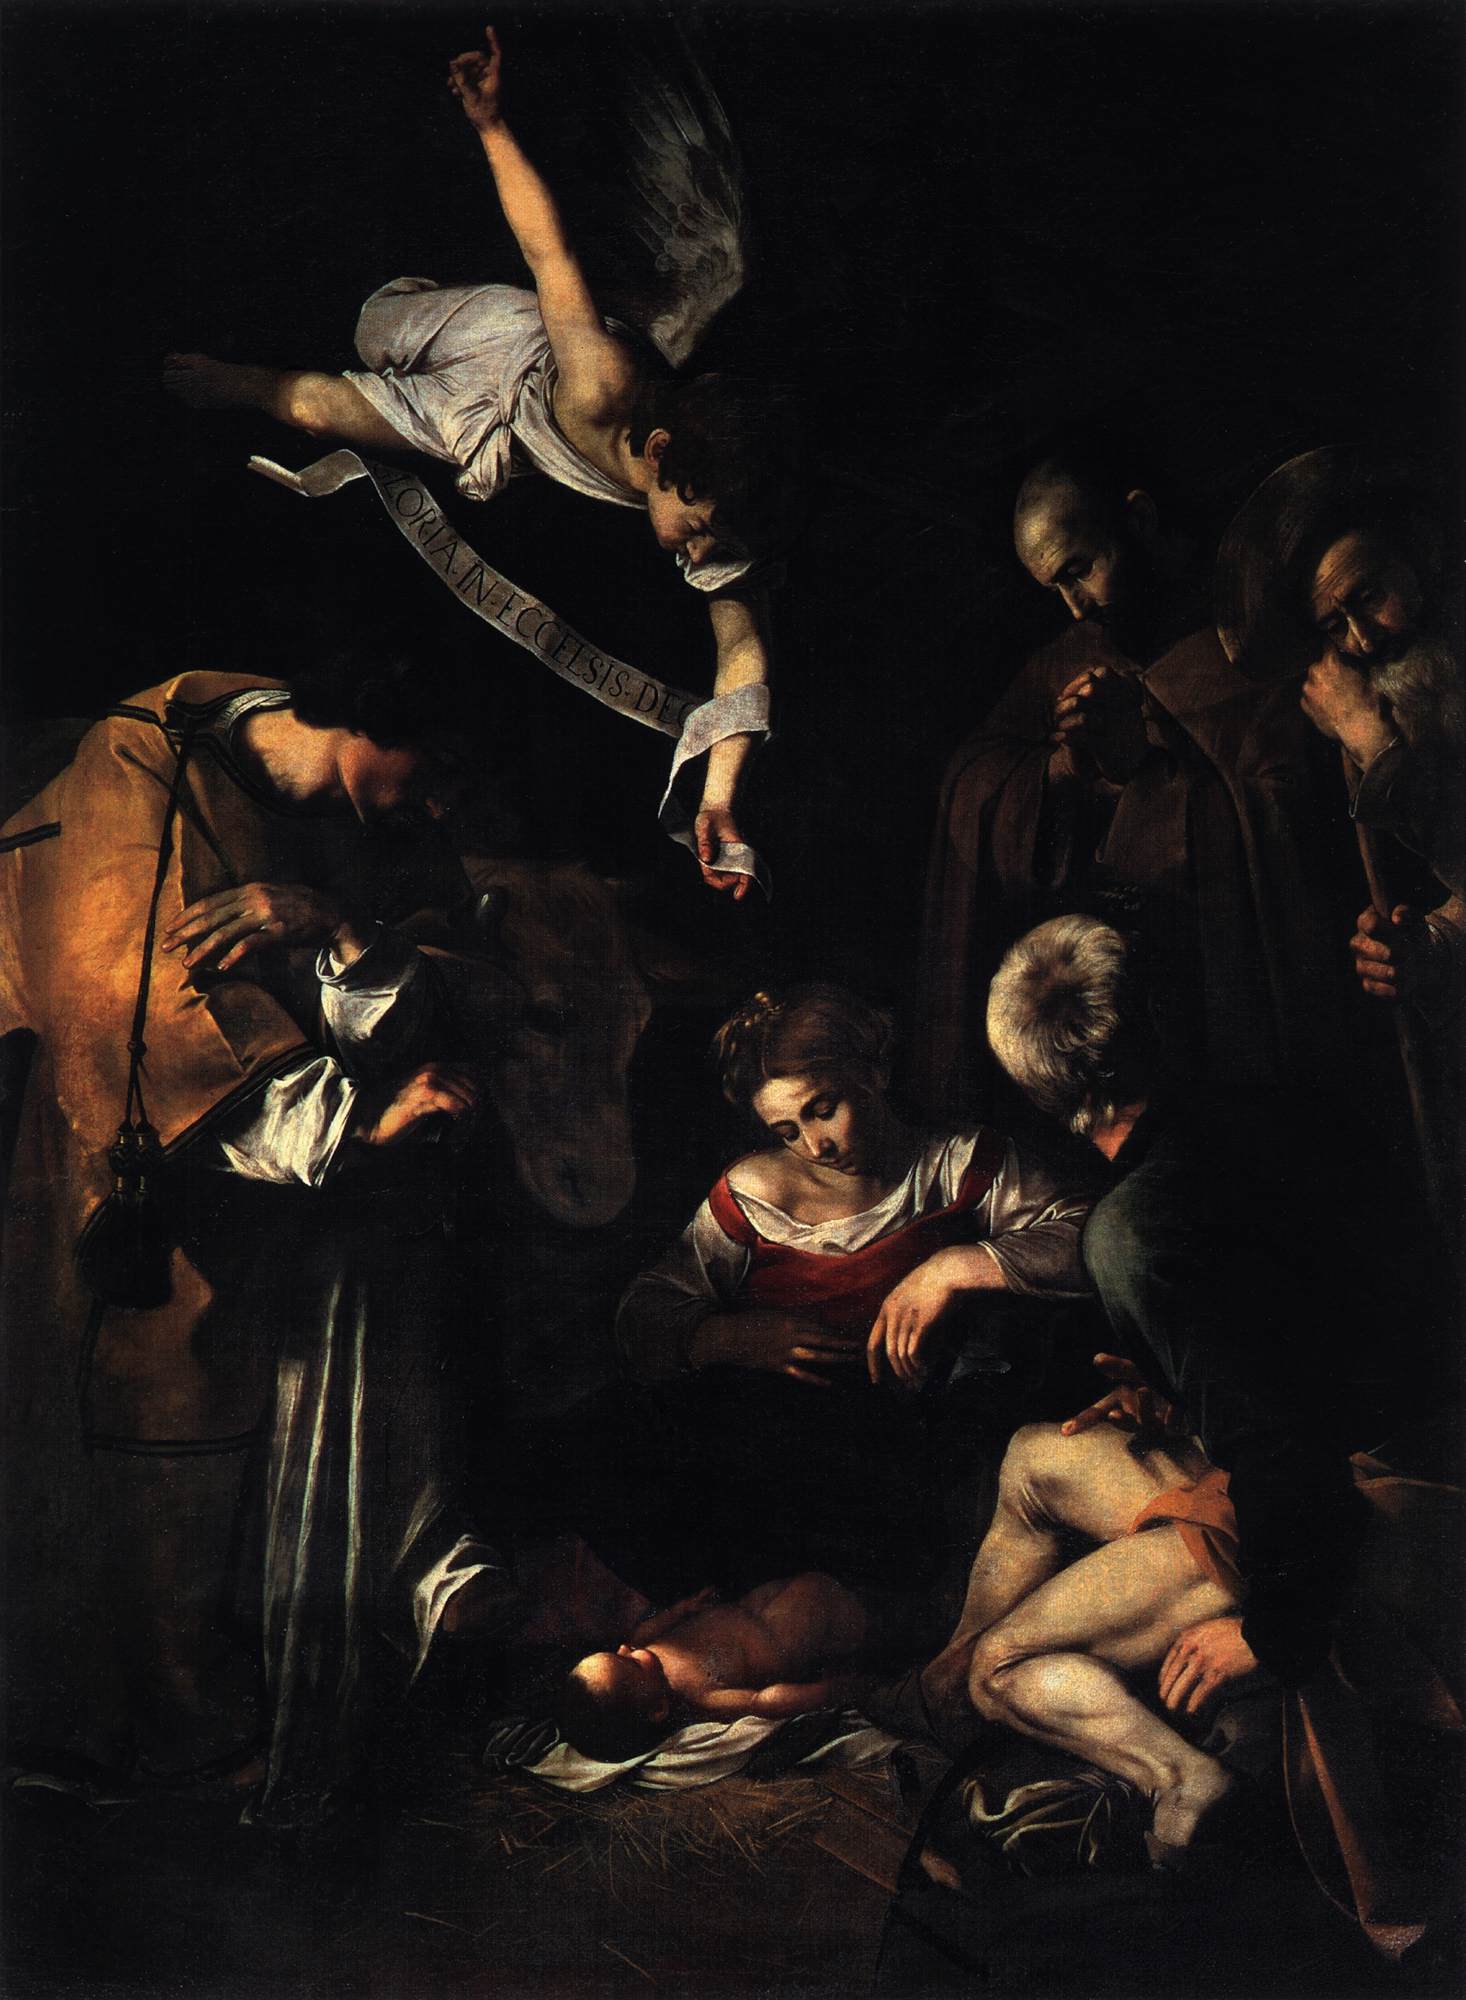 Caravaggio, Nativity with St. Francis and St. Lawrence, at wga.hu